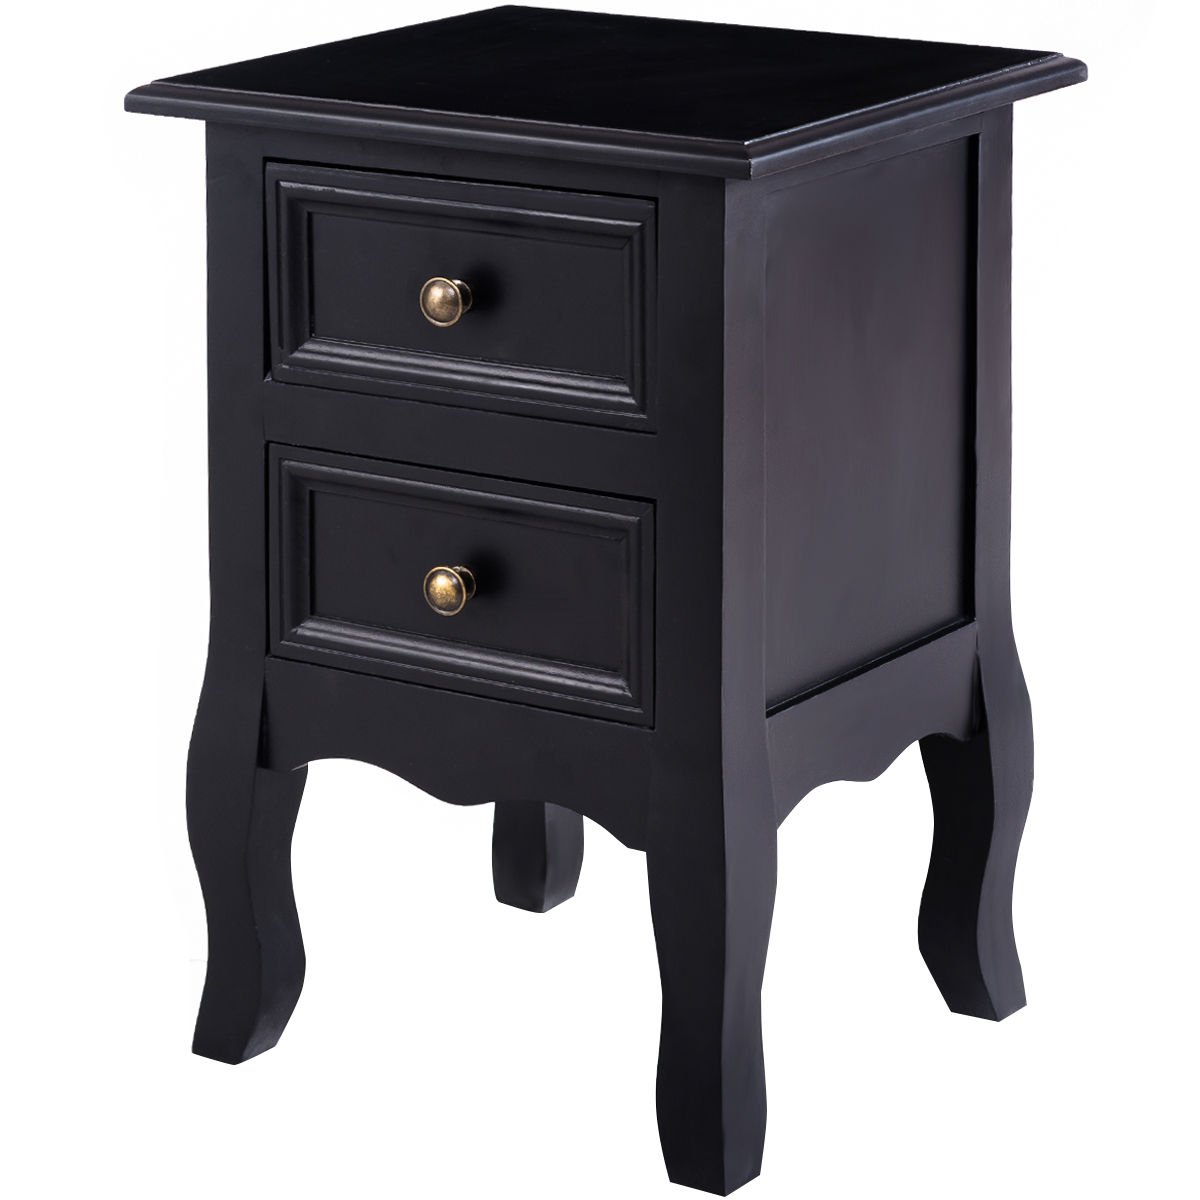 black accent side end table night stand curved legs timmy bedroom drawers with ebook kitchen dining white lamp home furniture sets antique styles garden hollywood mirrored